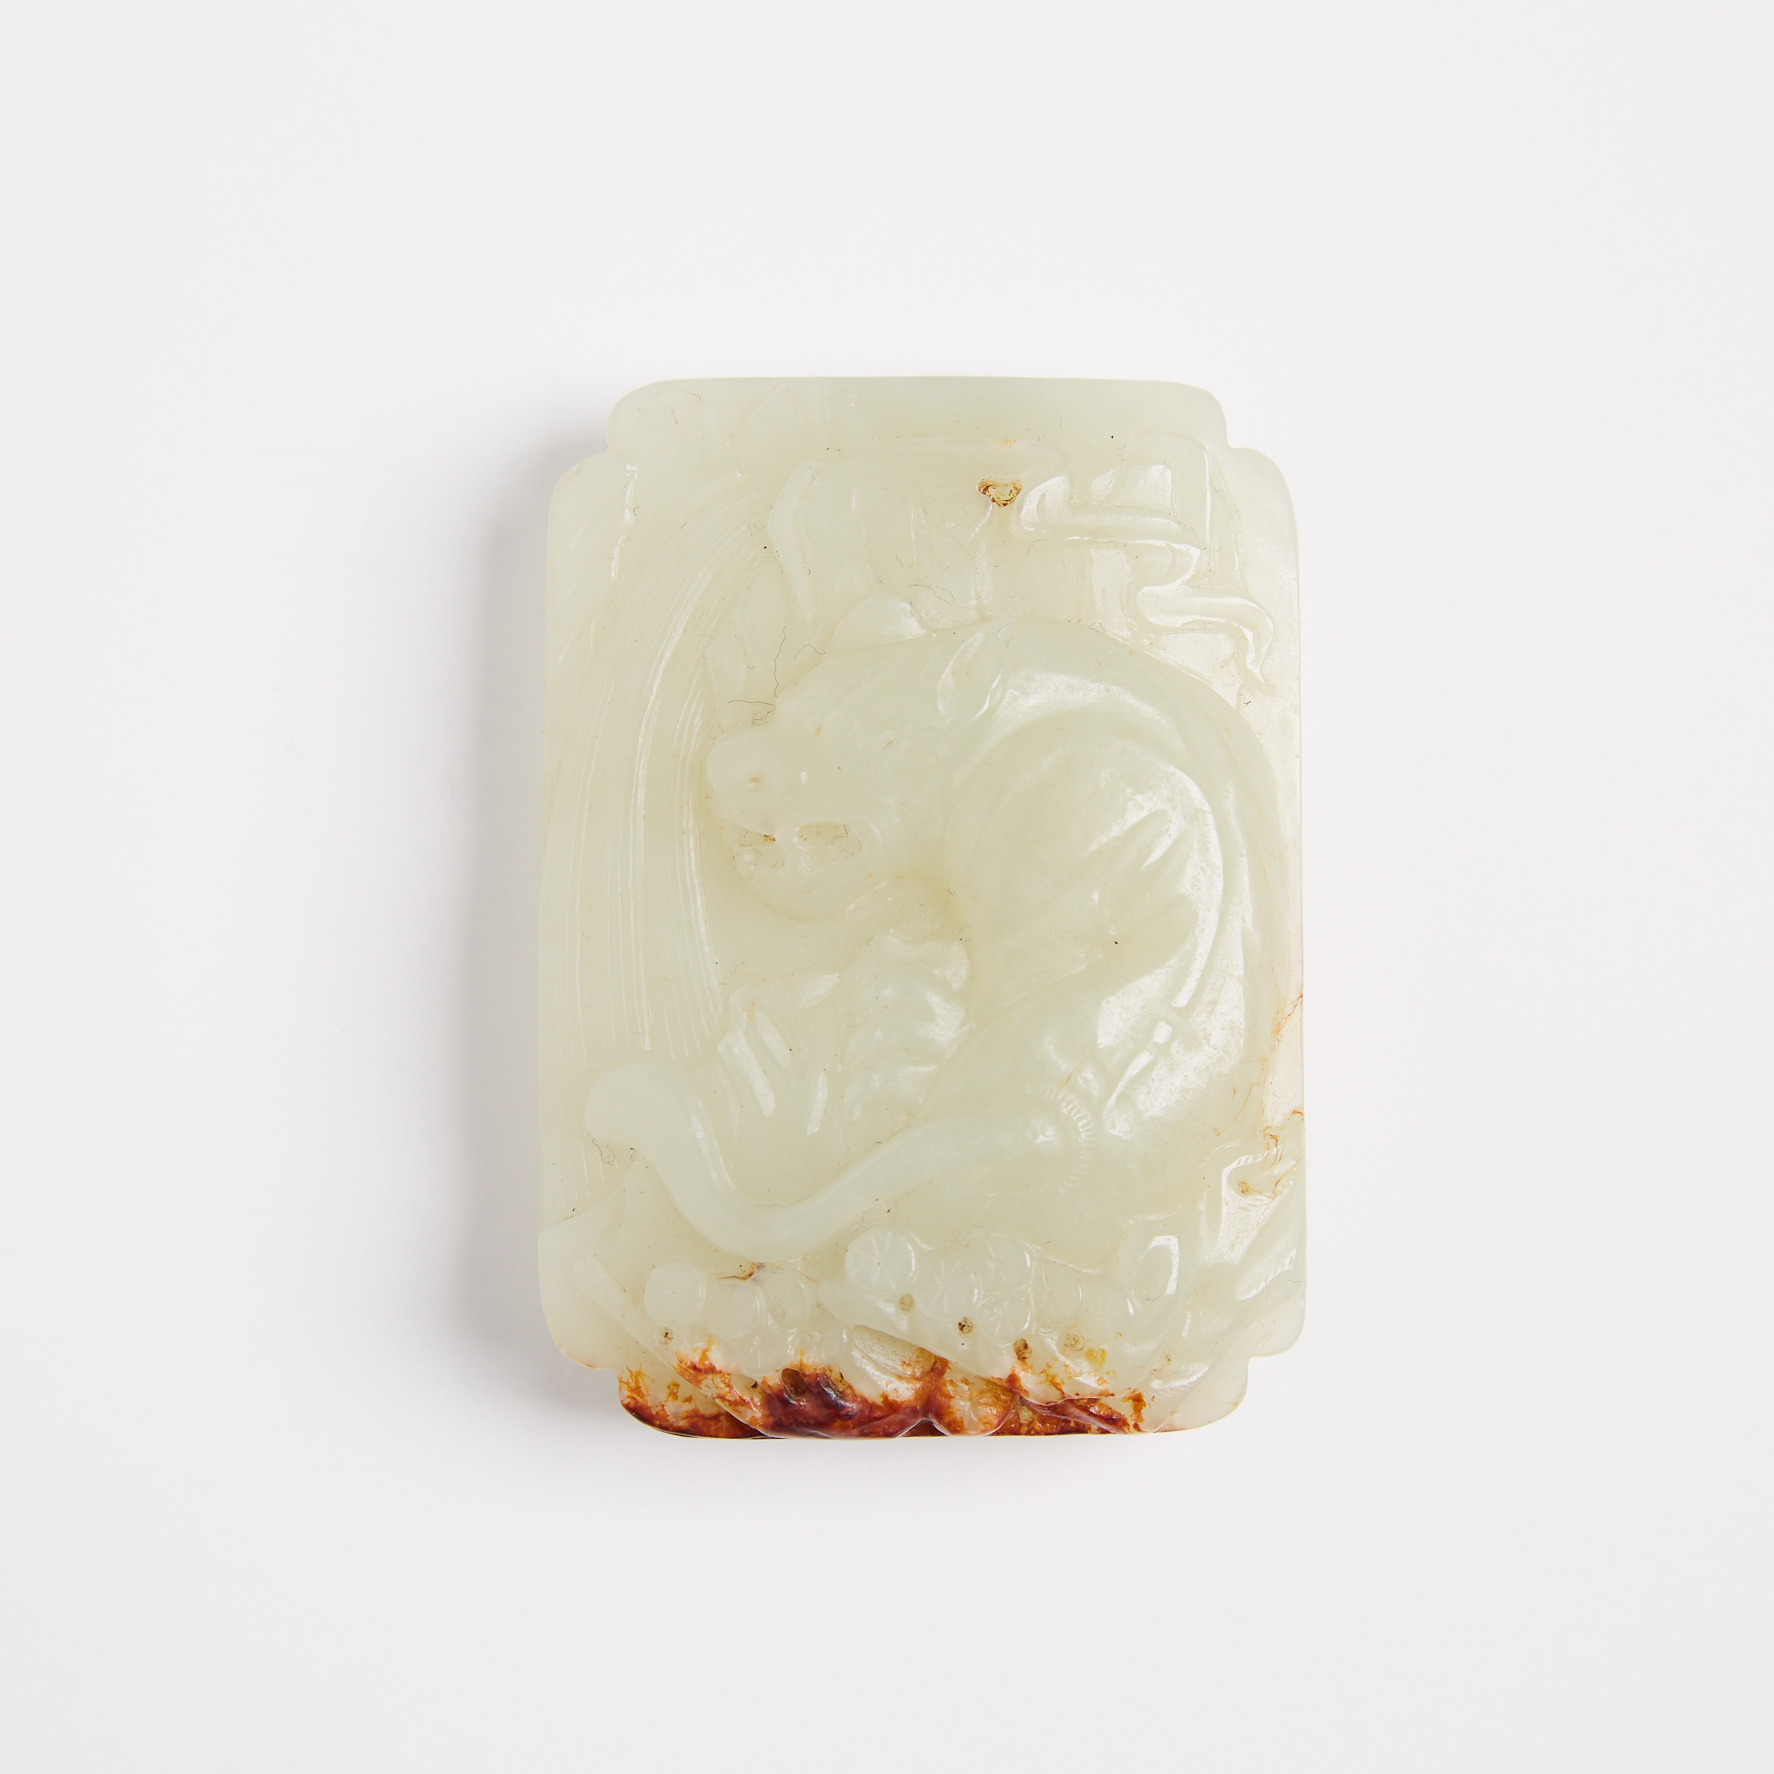 A Celadon and Russet Jade Carved Belt Buckle, Yuan/Ming Dynasty